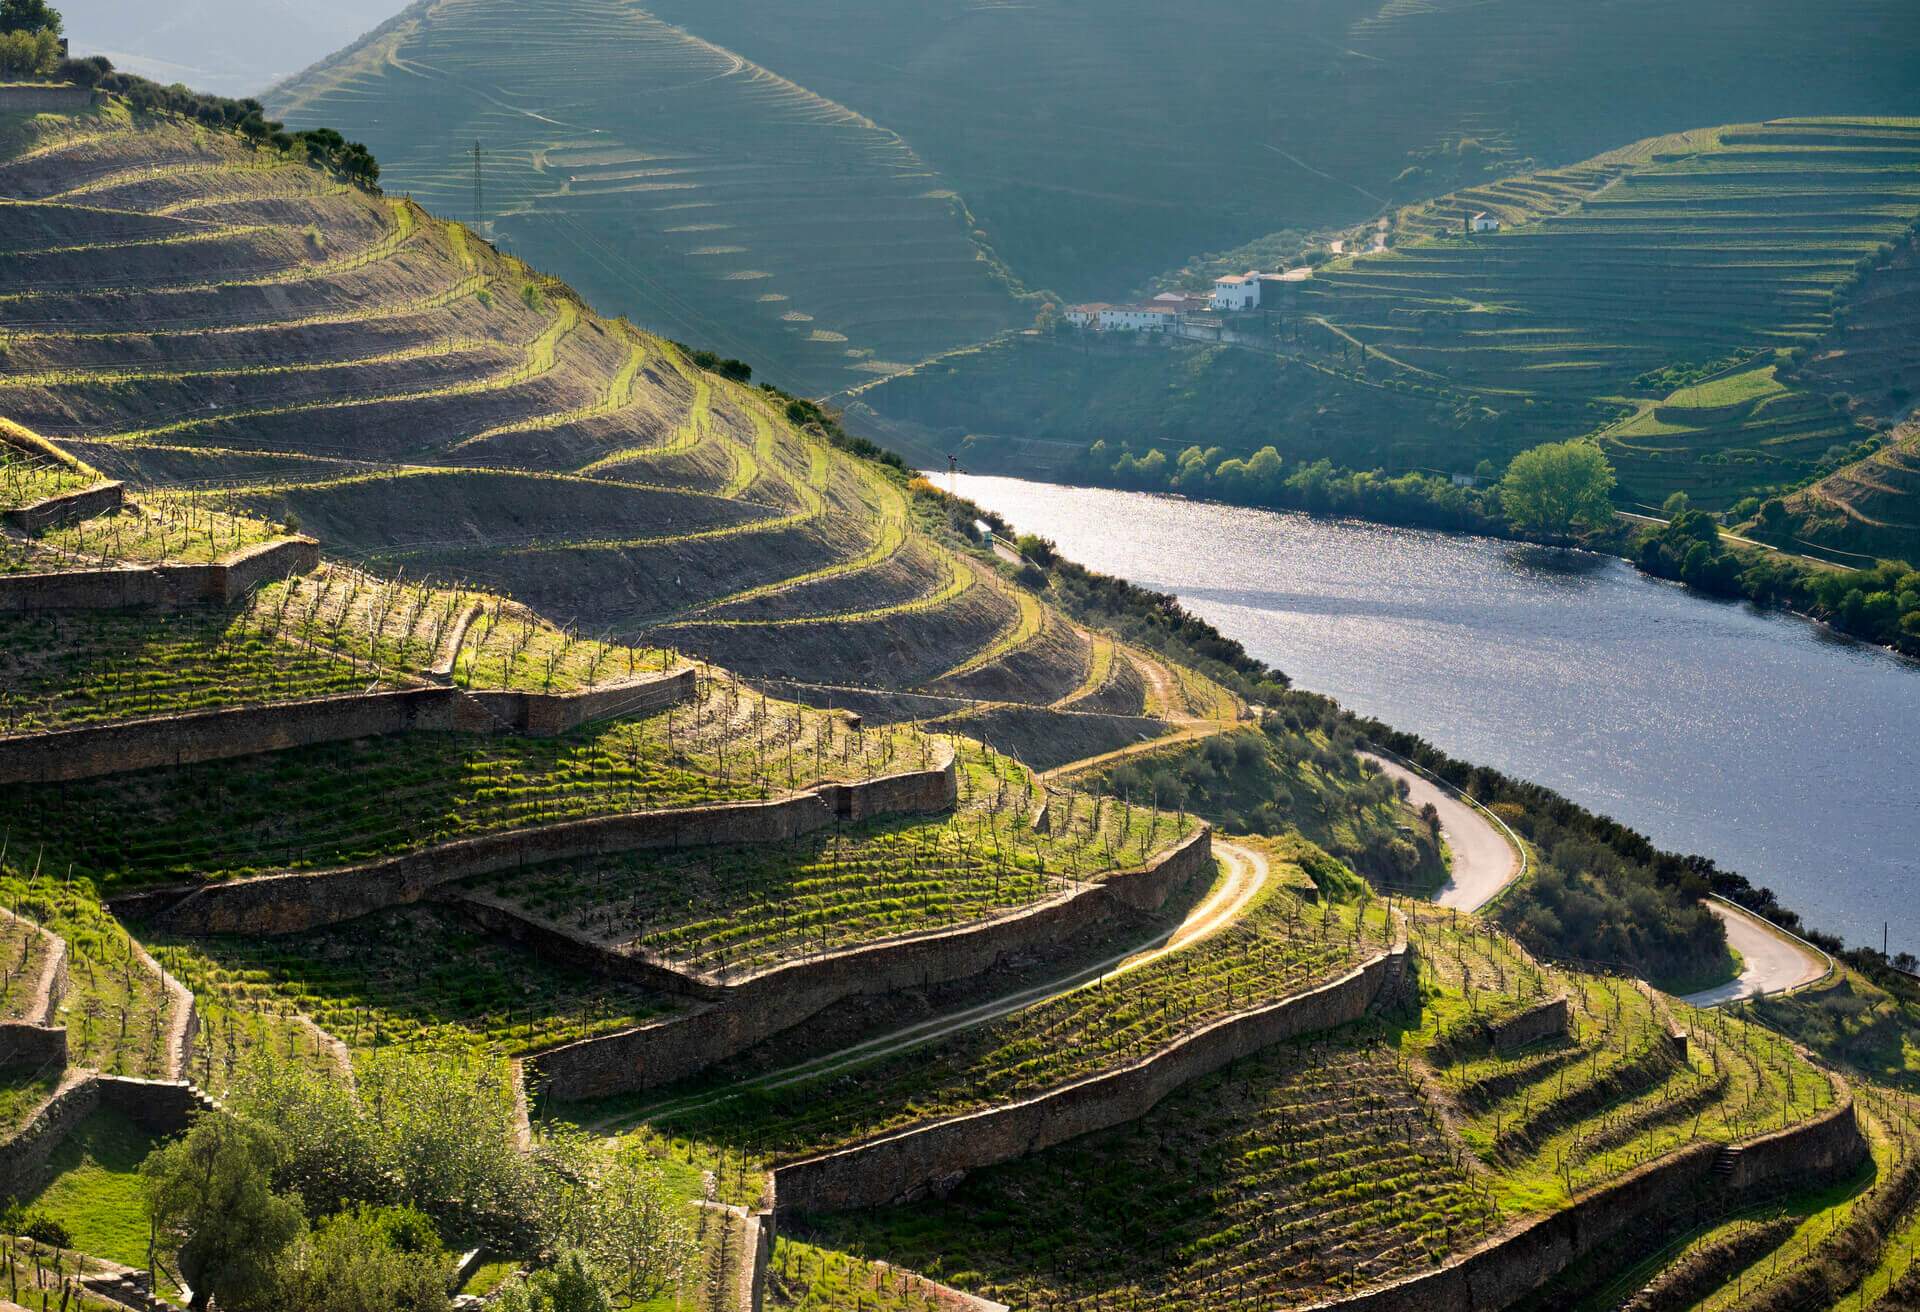 dest_portugal_douro-valley_vineyards_gettyimages-1191026830_universal_within-usage-period_78555-1